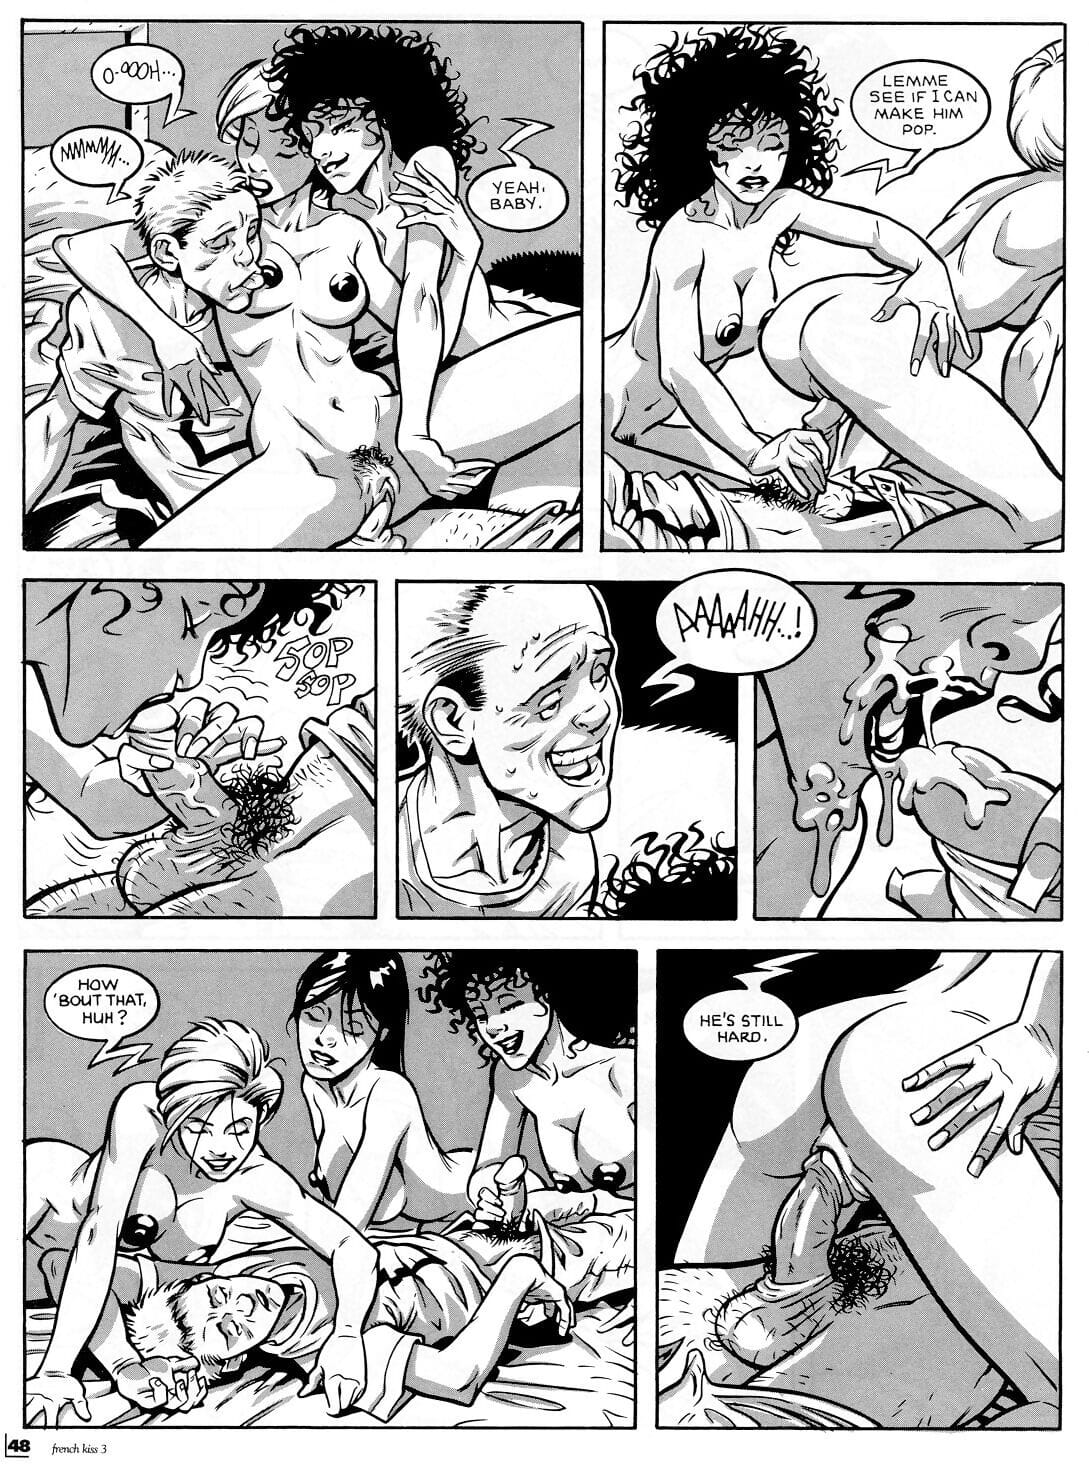 French Kiss 3 - part 2 page 1